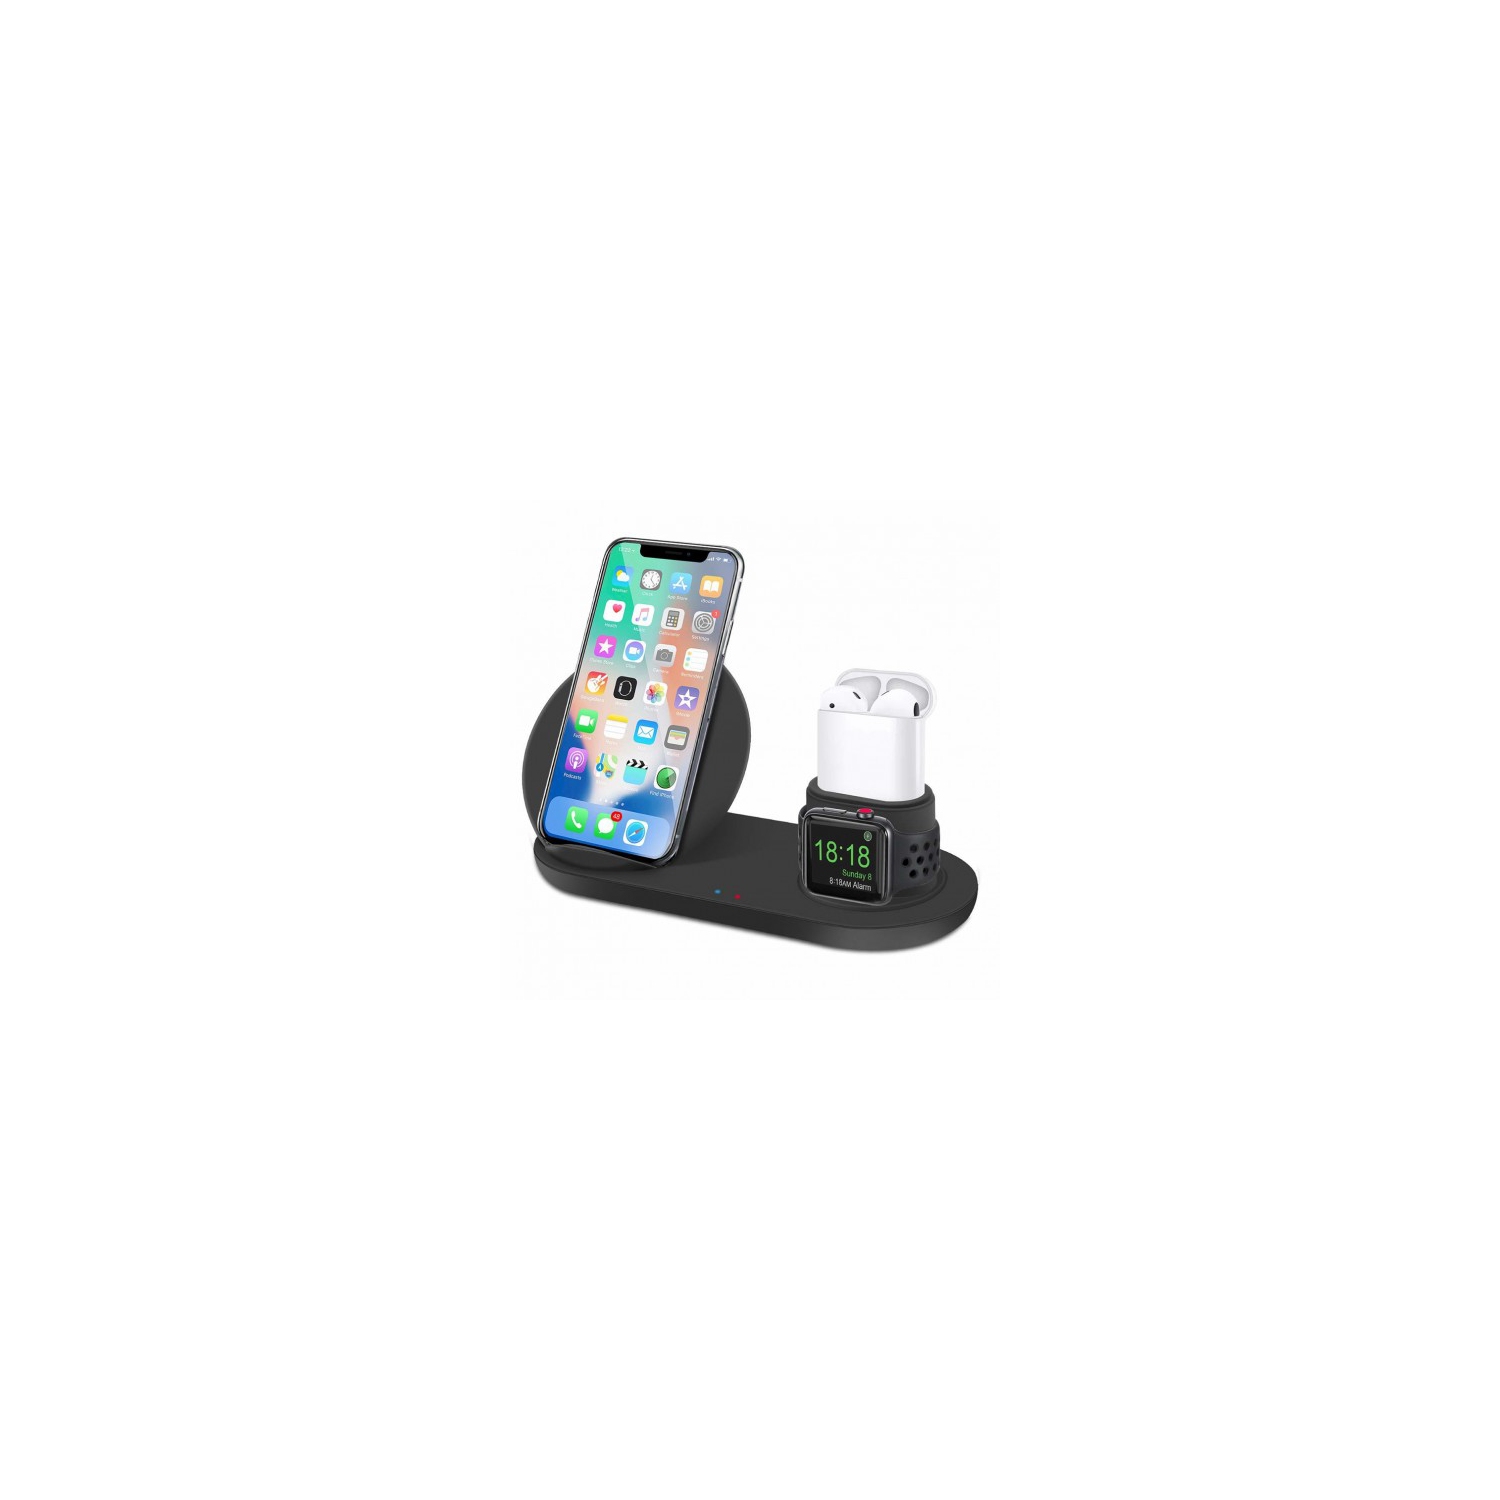 Three in One Qi Wireless Fast Charging Stand for Phone, Apple Watch (Series 1 - 4) and AirPods - Black